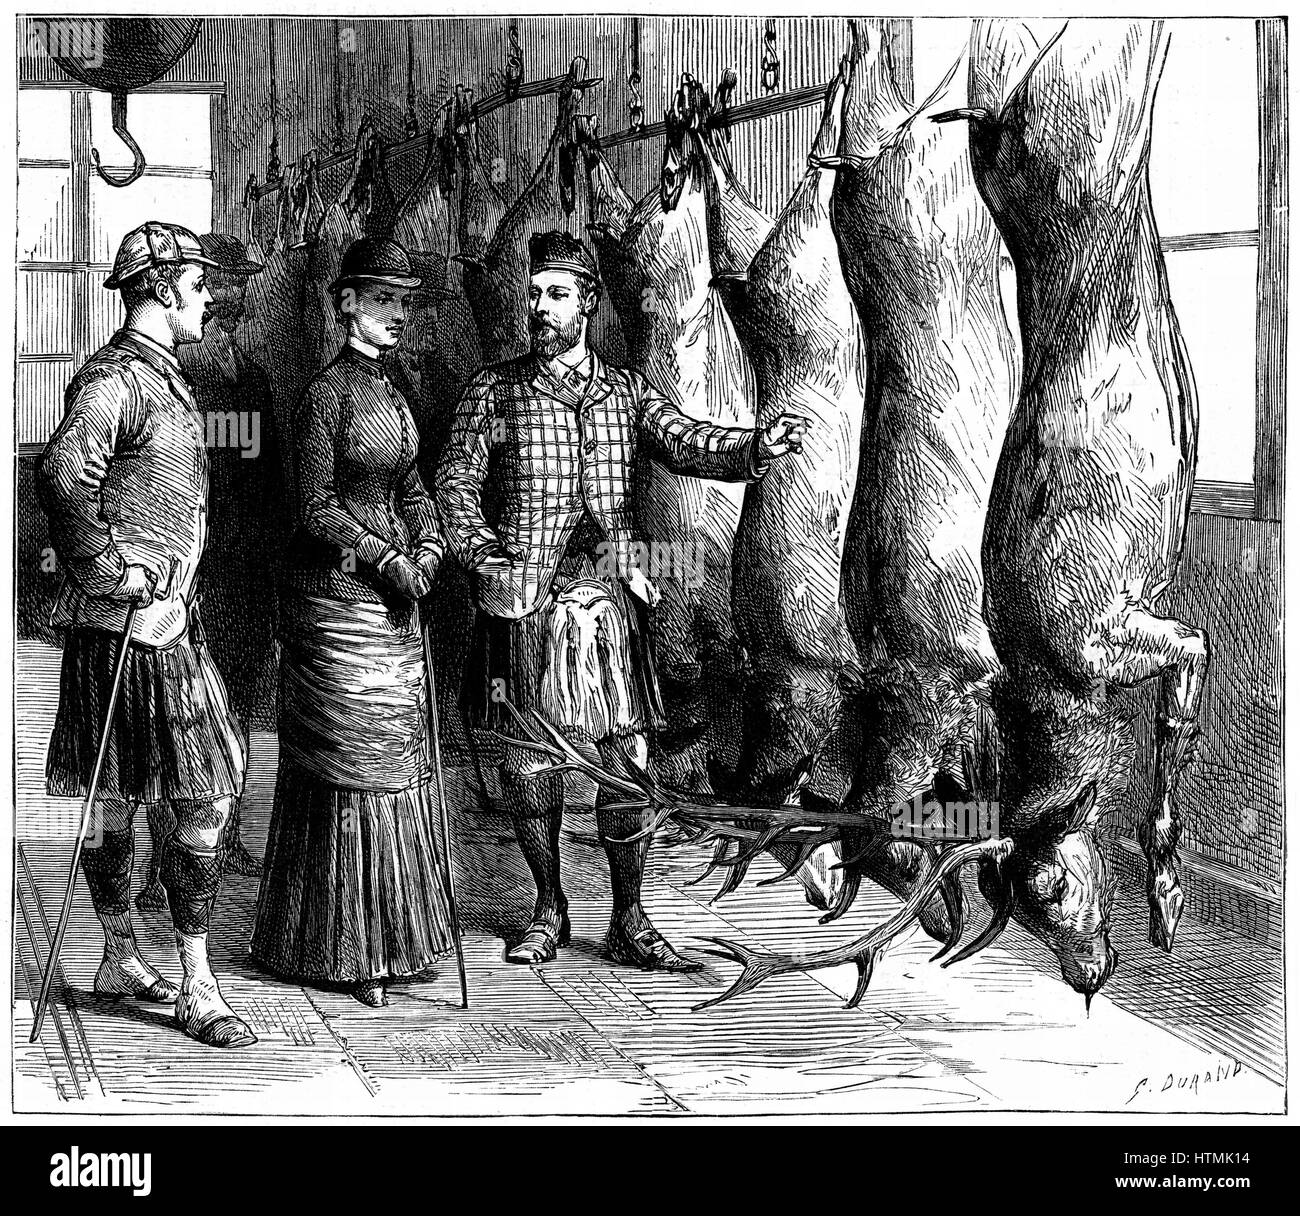 Duke of Fife's game larder, 1881. The Prince and Princess of Wales (Edward VII and Queen Alexandra from 1901) being shown the Duke of Fife's game larder during a deerstalking holiday in the Forest of Mar, Scotland. From 'The Graphic'. (London, 1881). Wood engraving. Stock Photo